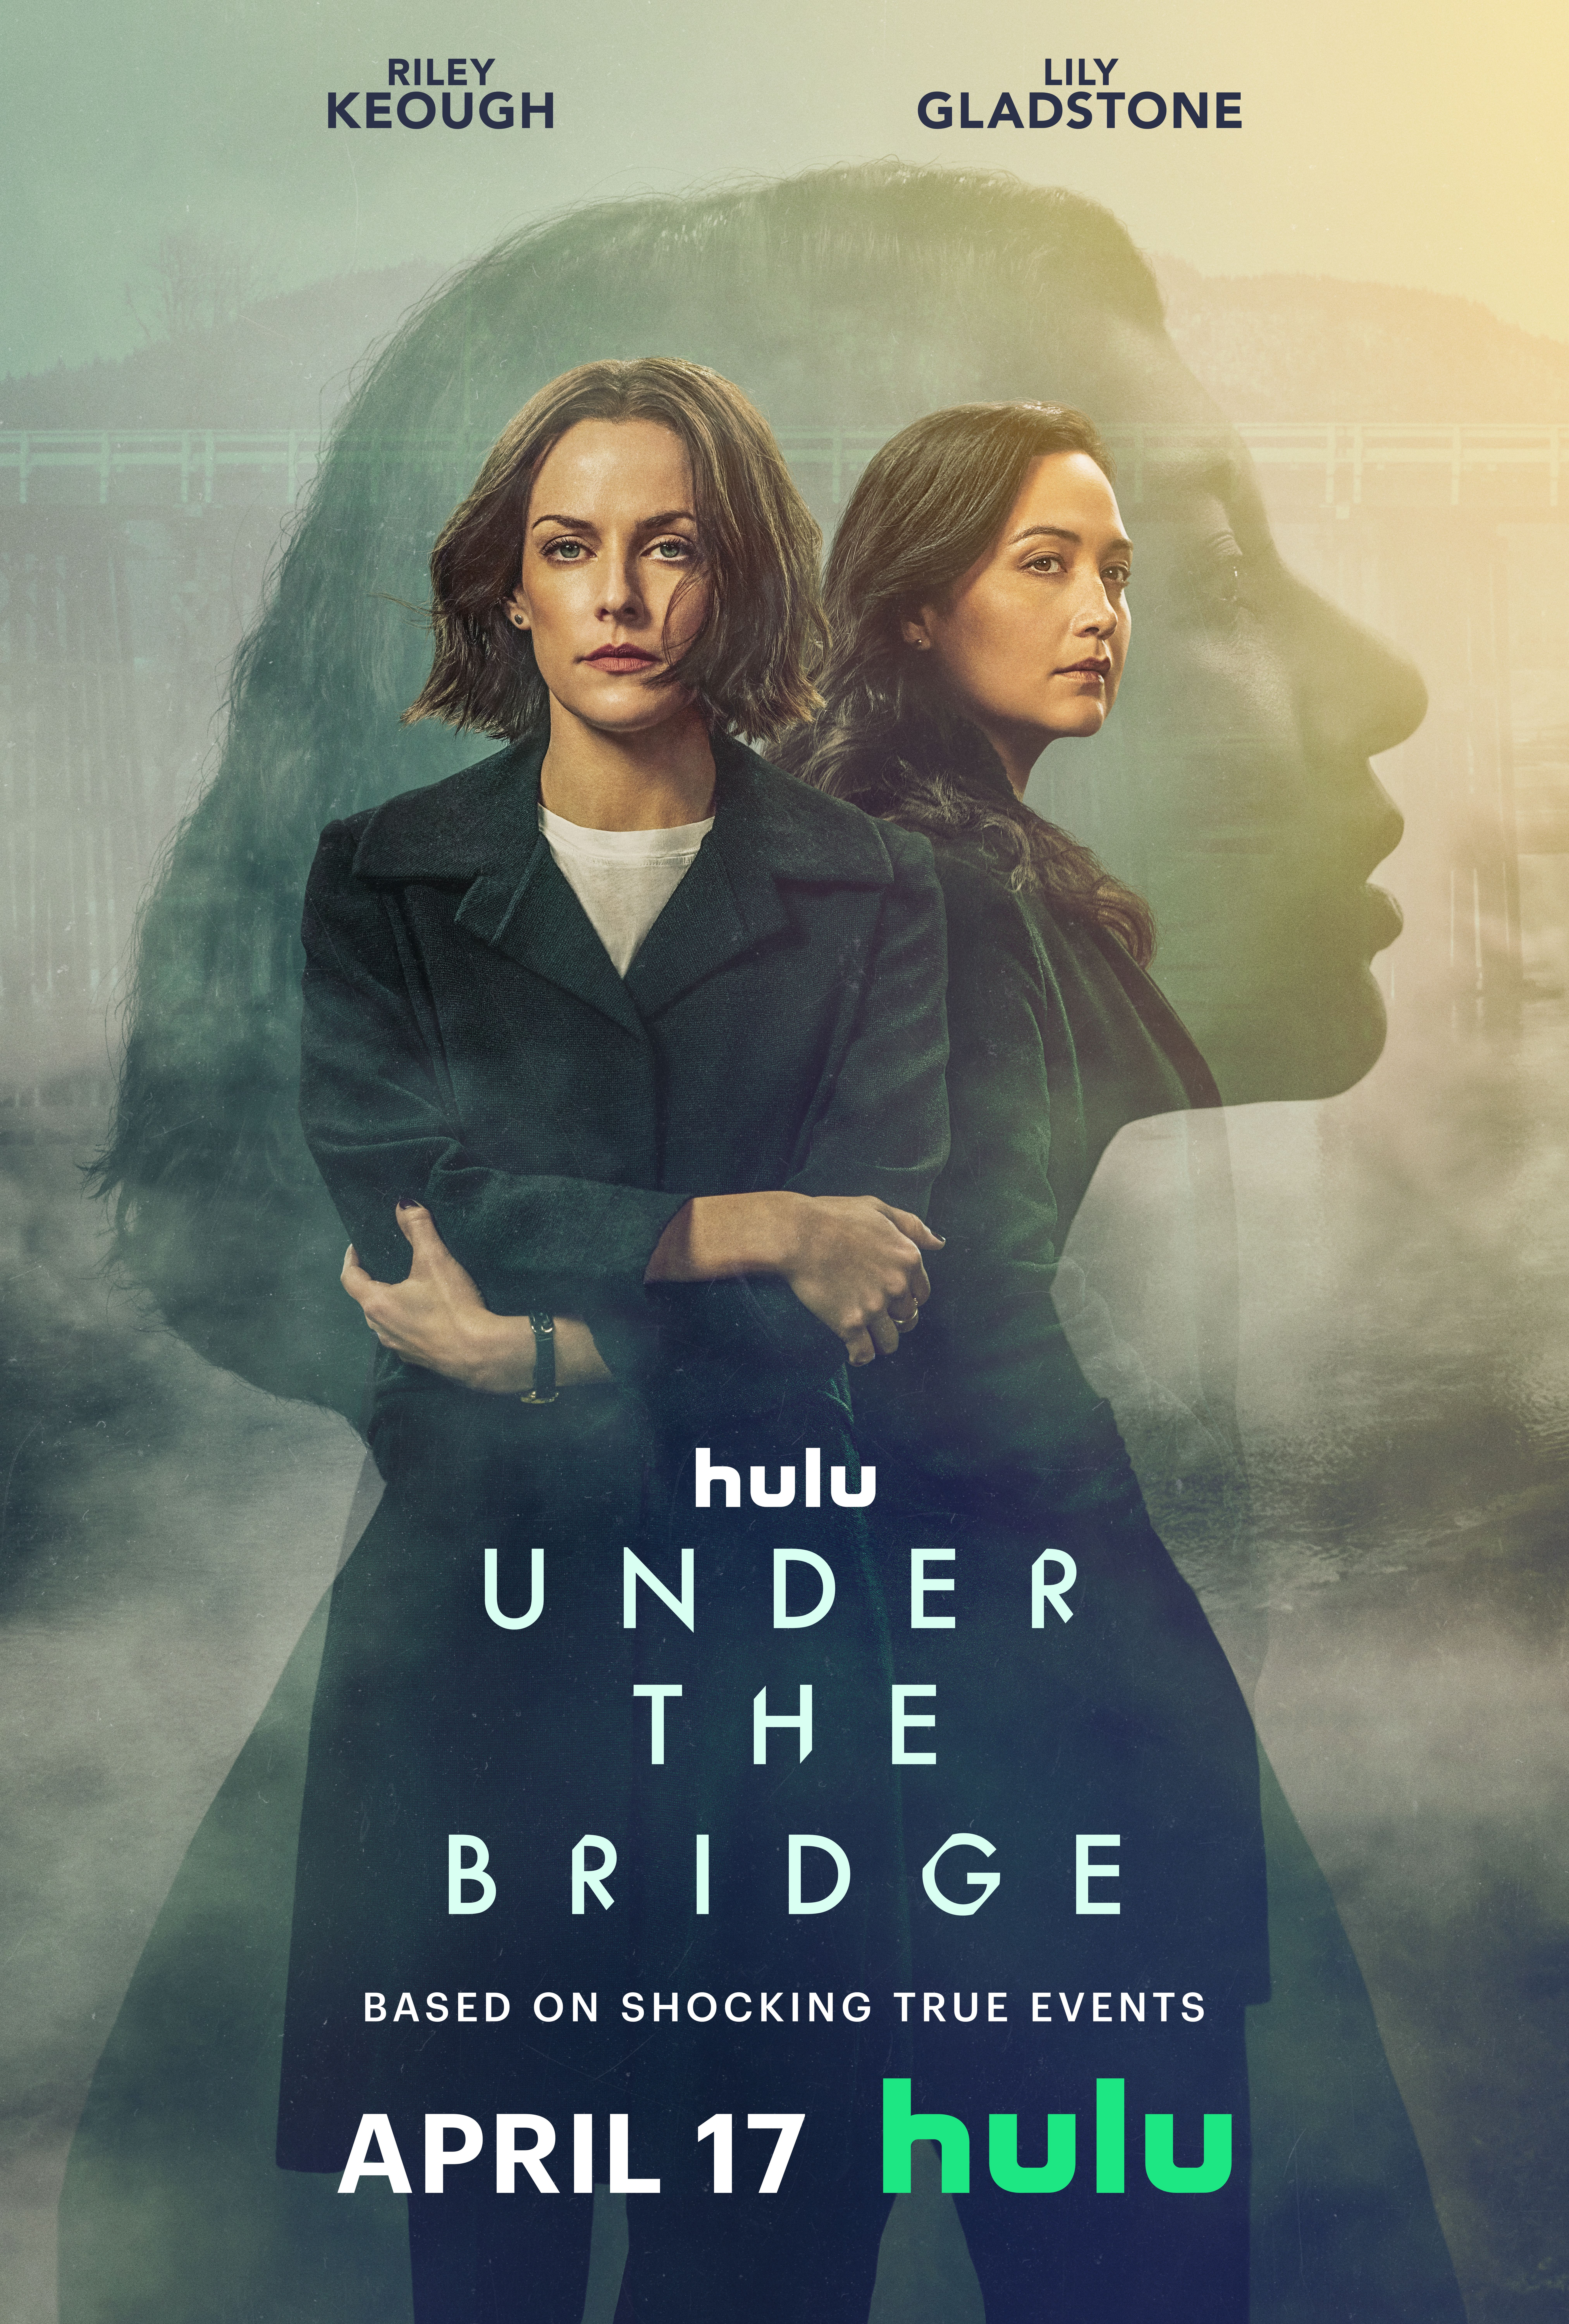 Poster for Under The Bridge featuring Lily Gladstone and Riley Keough in front of a woman's silhouette